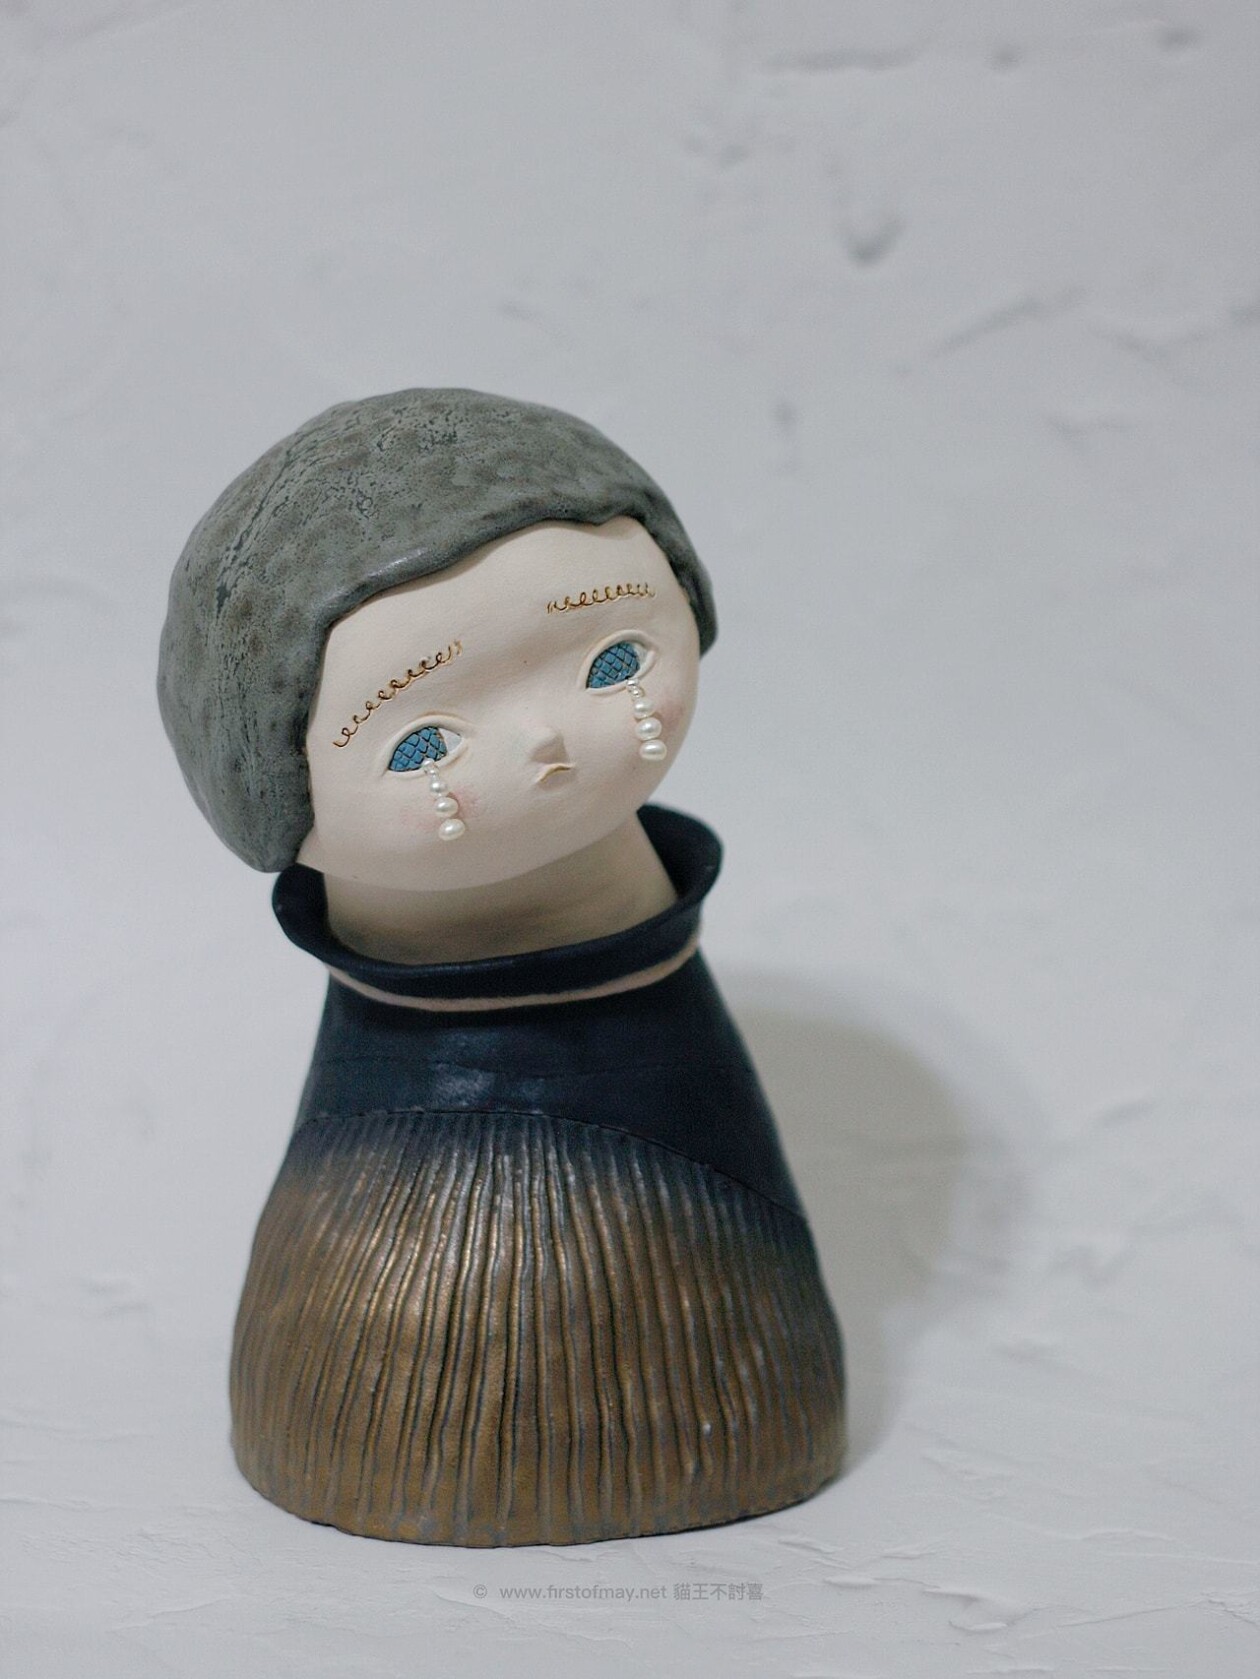 Delicate Ceramic Sculptures Of Figures Crying Pearls By First Of May Studio (10)